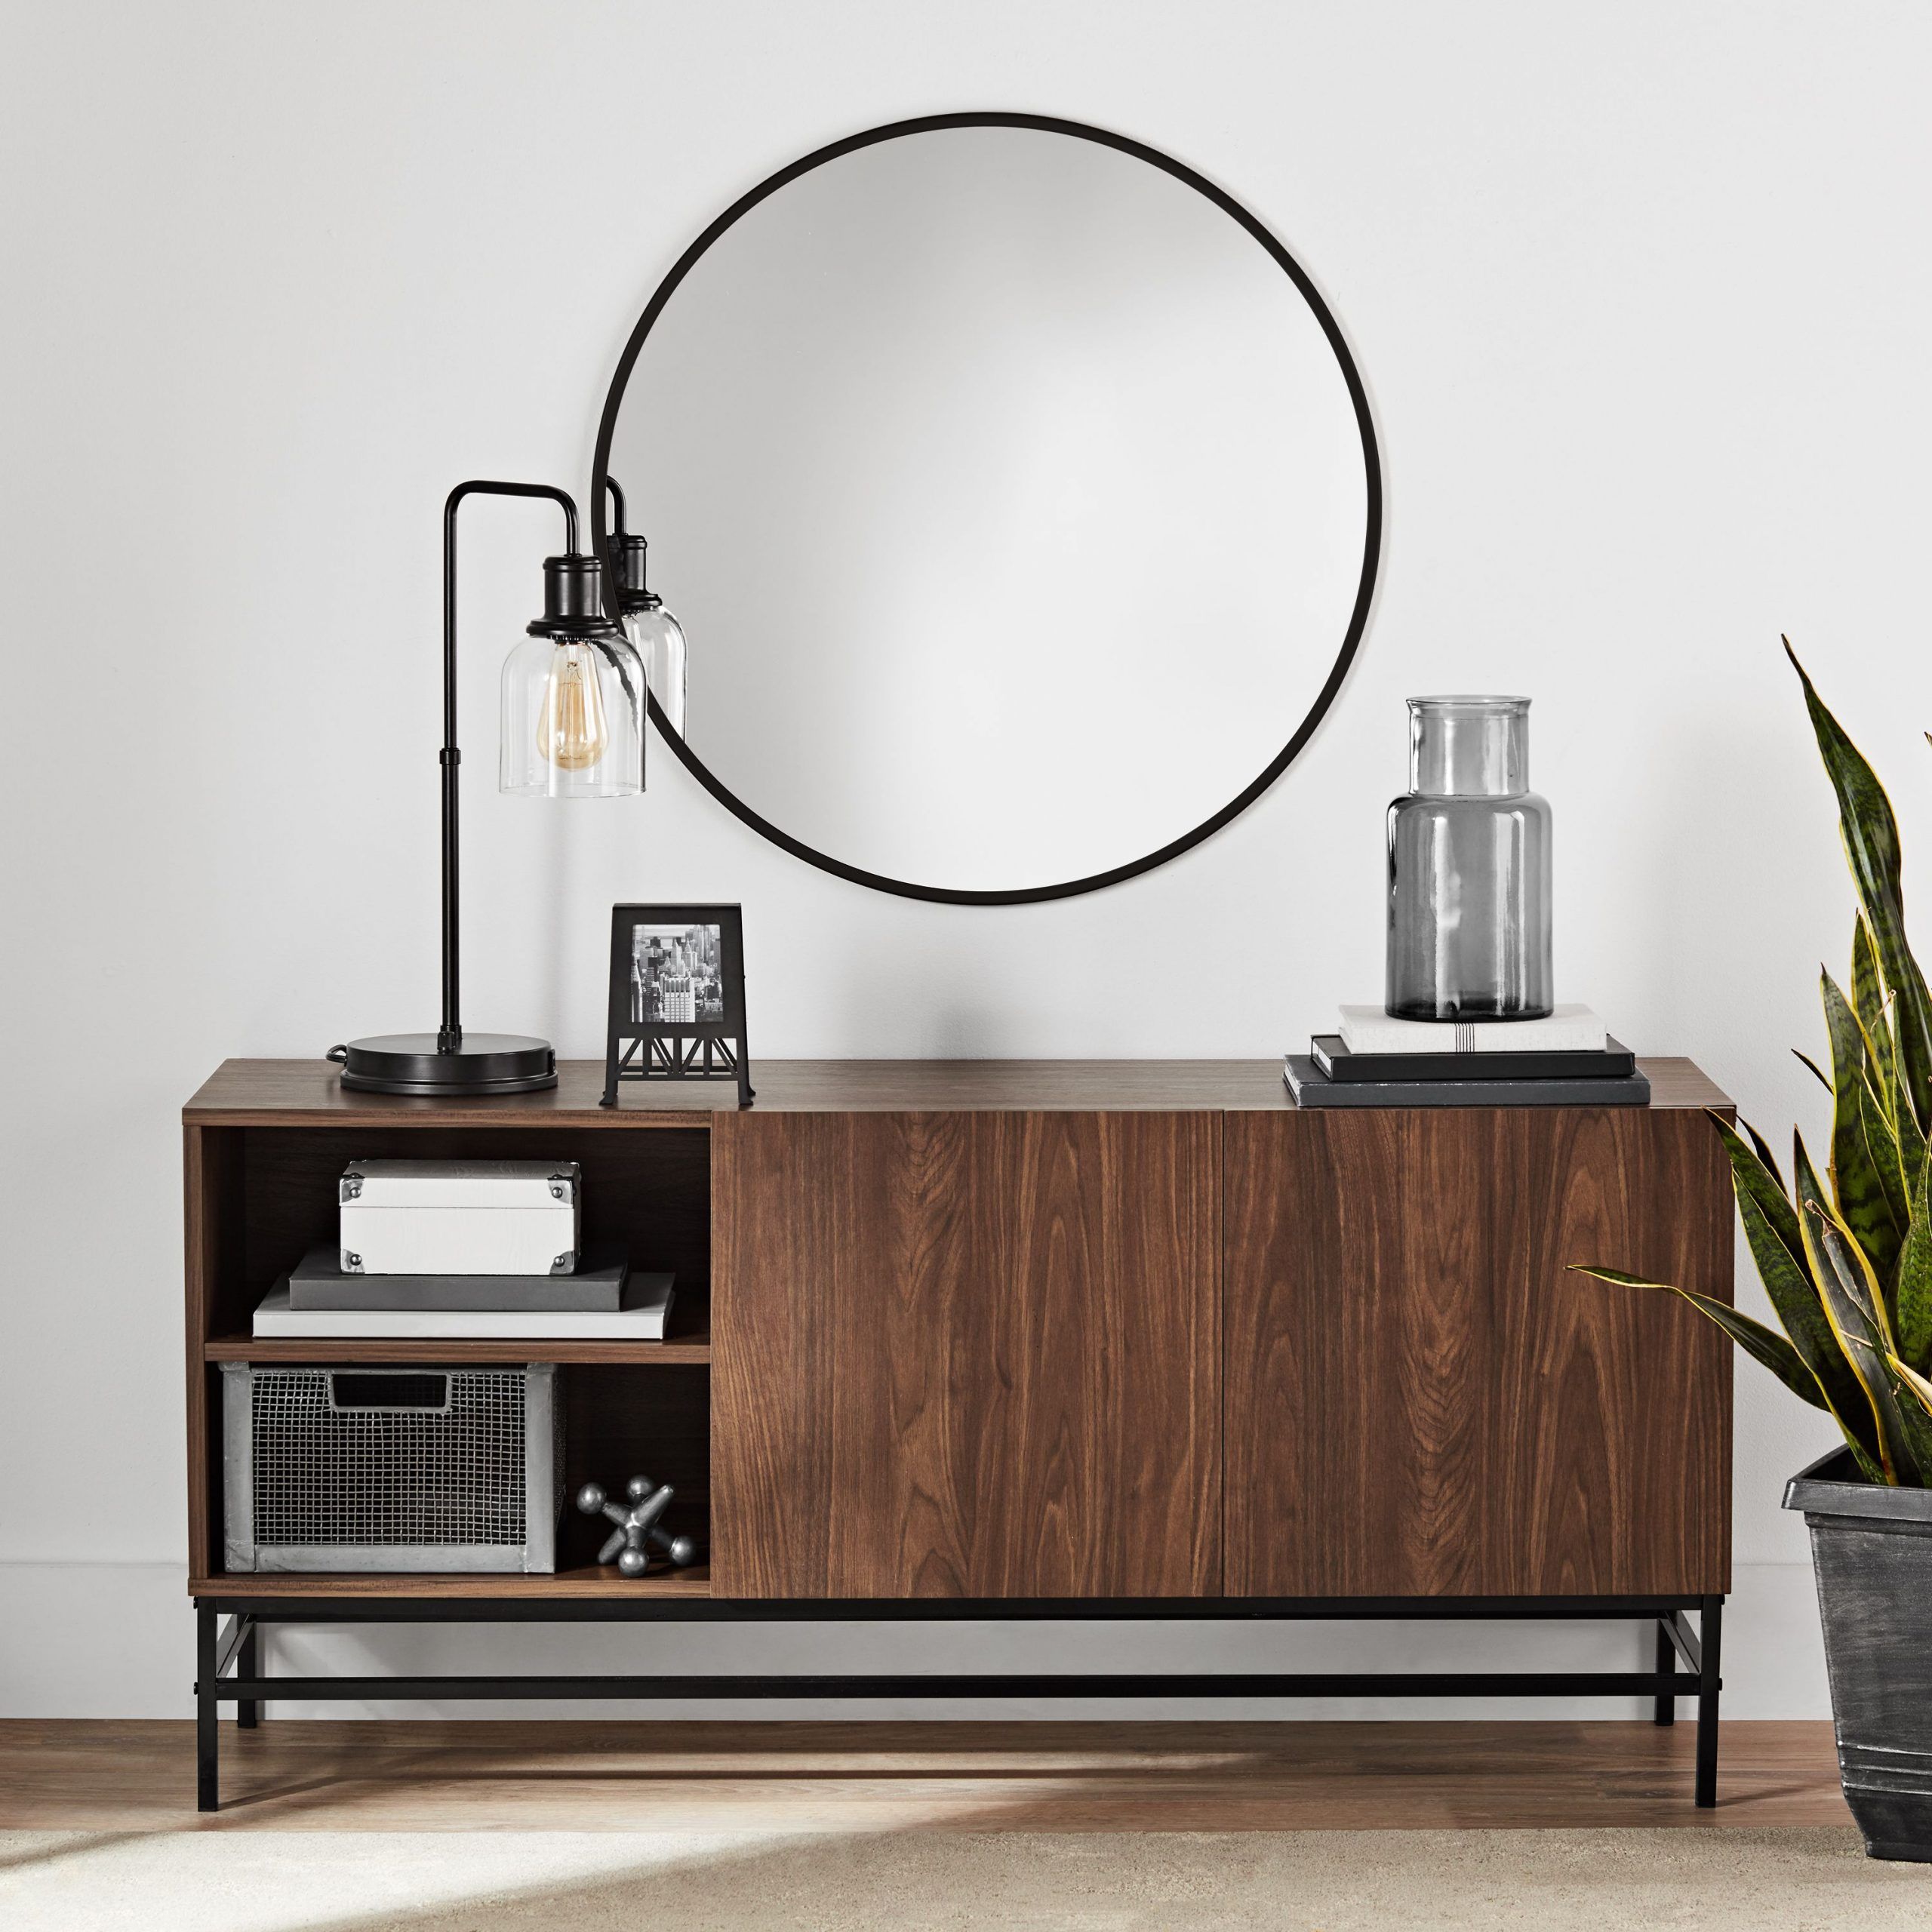 Mainstays Sumpter Park Console Table, Canyon Walnut Intended For Mainstays Parsons Tv Stands With Multiple Finishes (View 5 of 15)